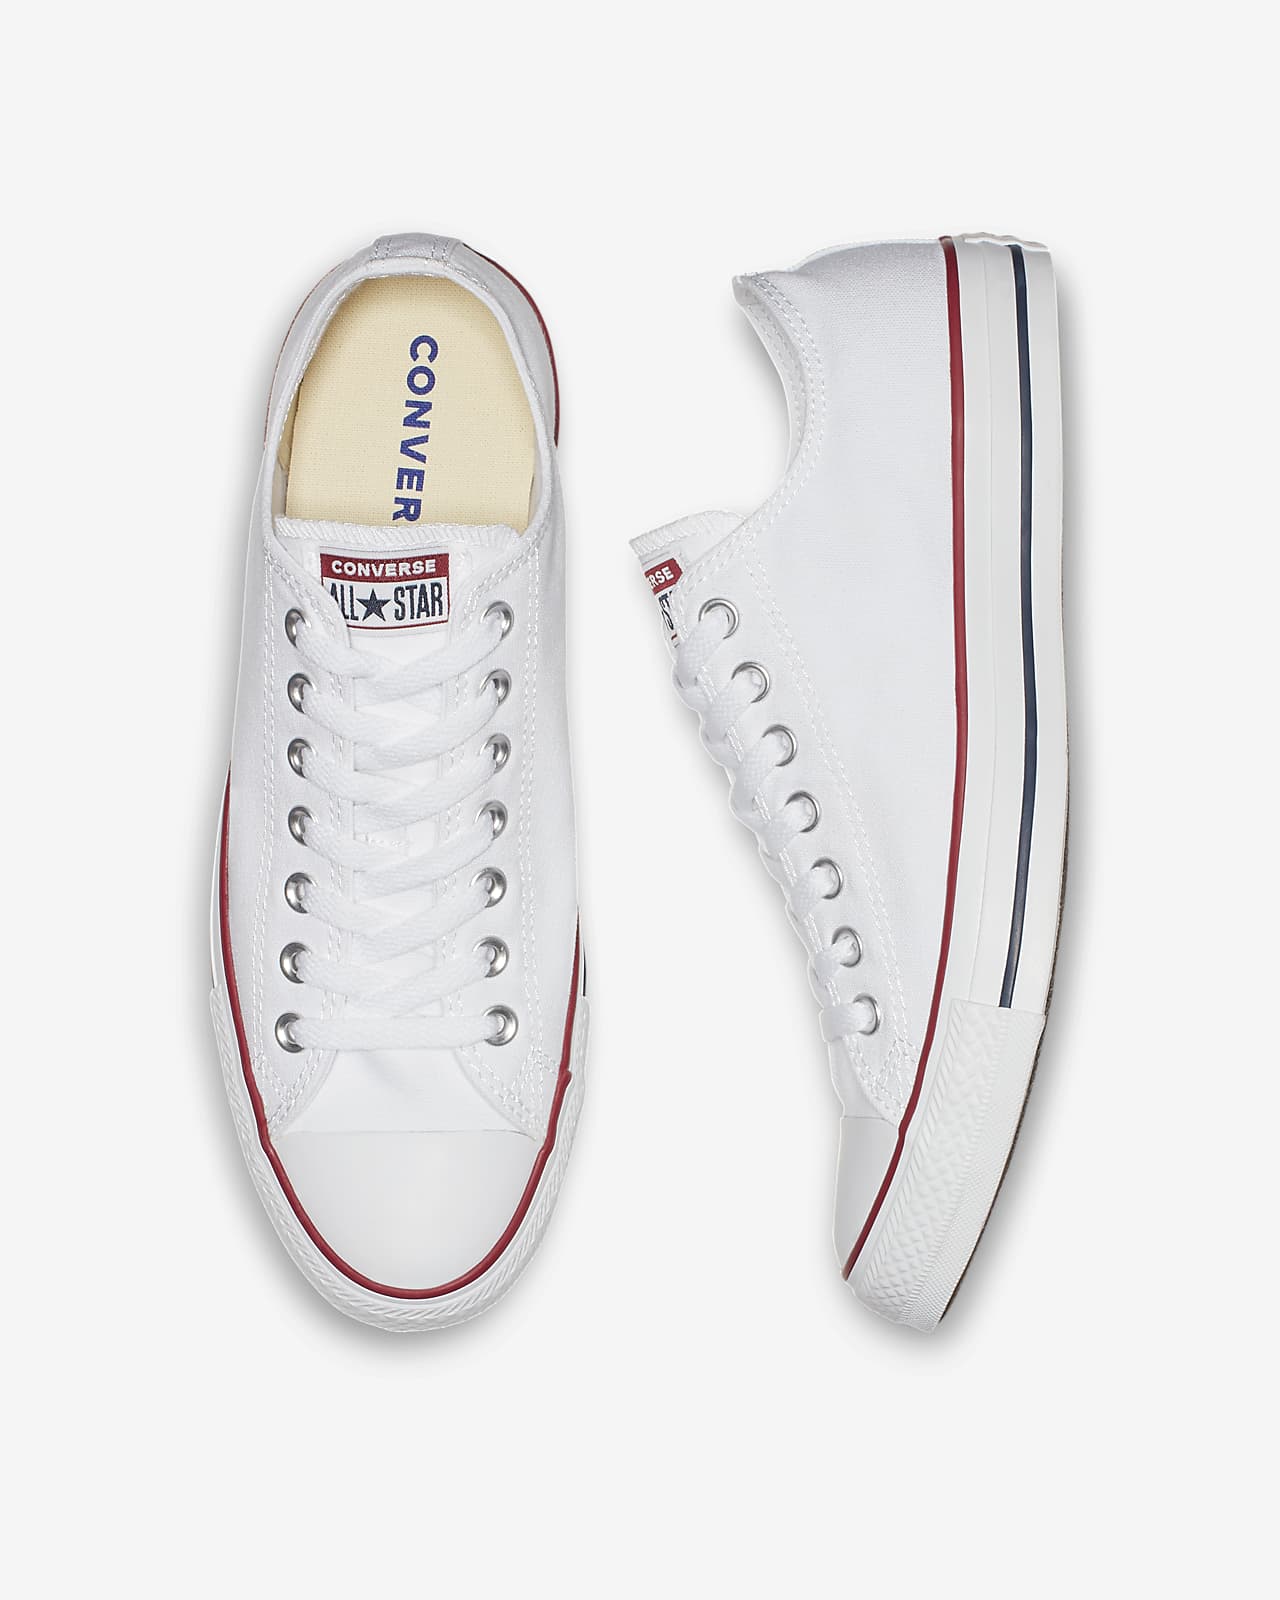 Converse Chuck Taylor All Star Low Top Unisex Shoe. Nike.com